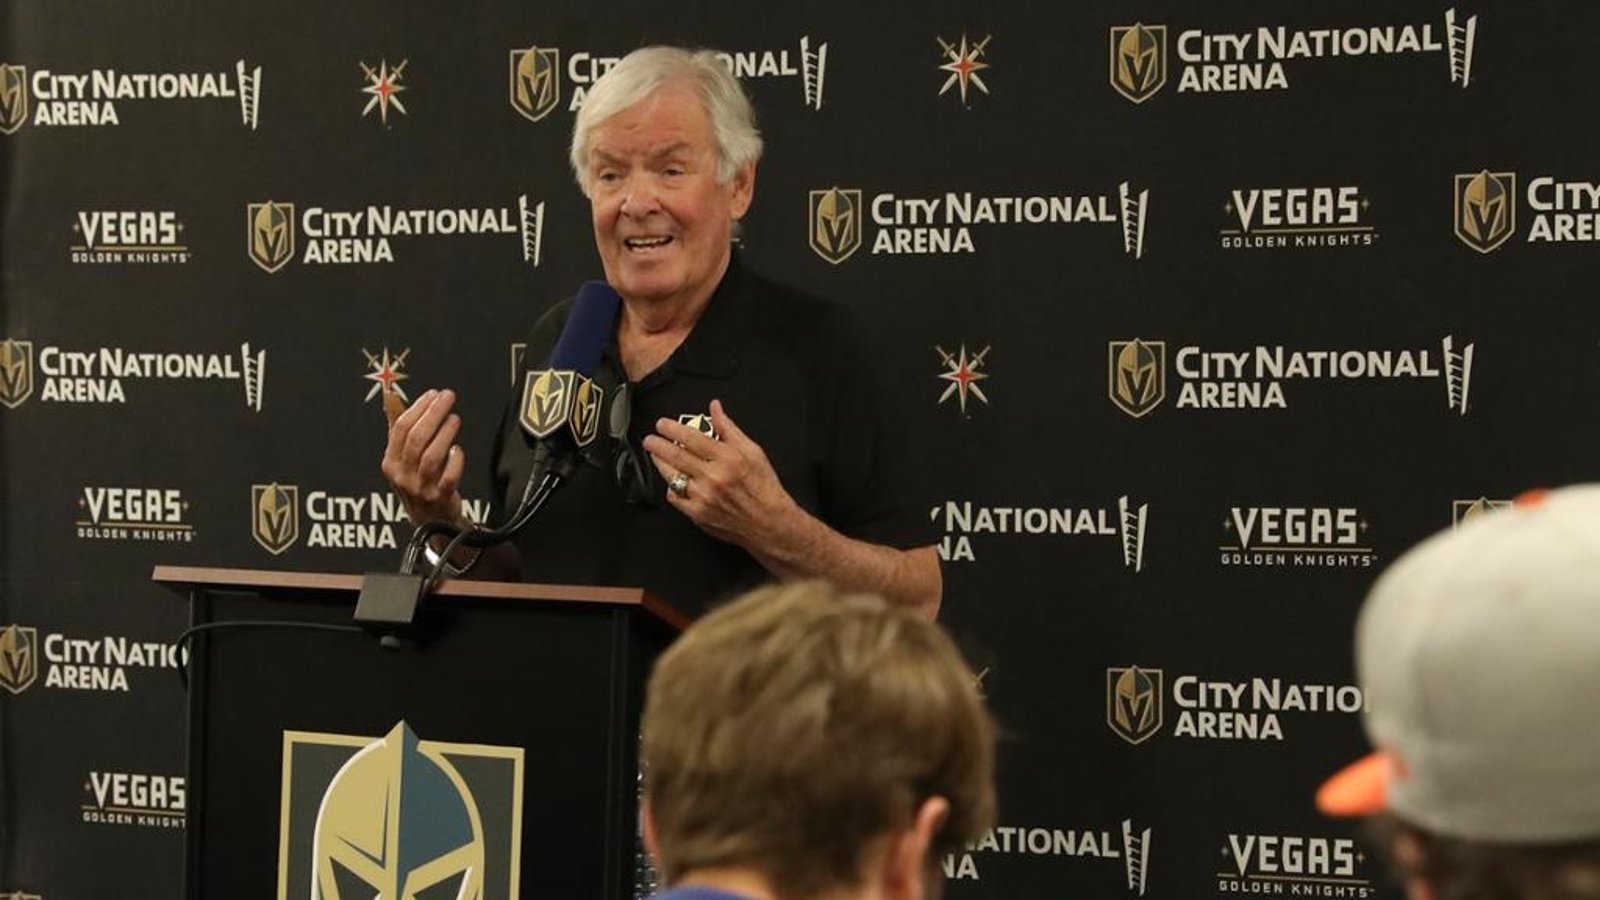 Golden Knights’ owner accidentally reveals info on new 3rd jersey! 